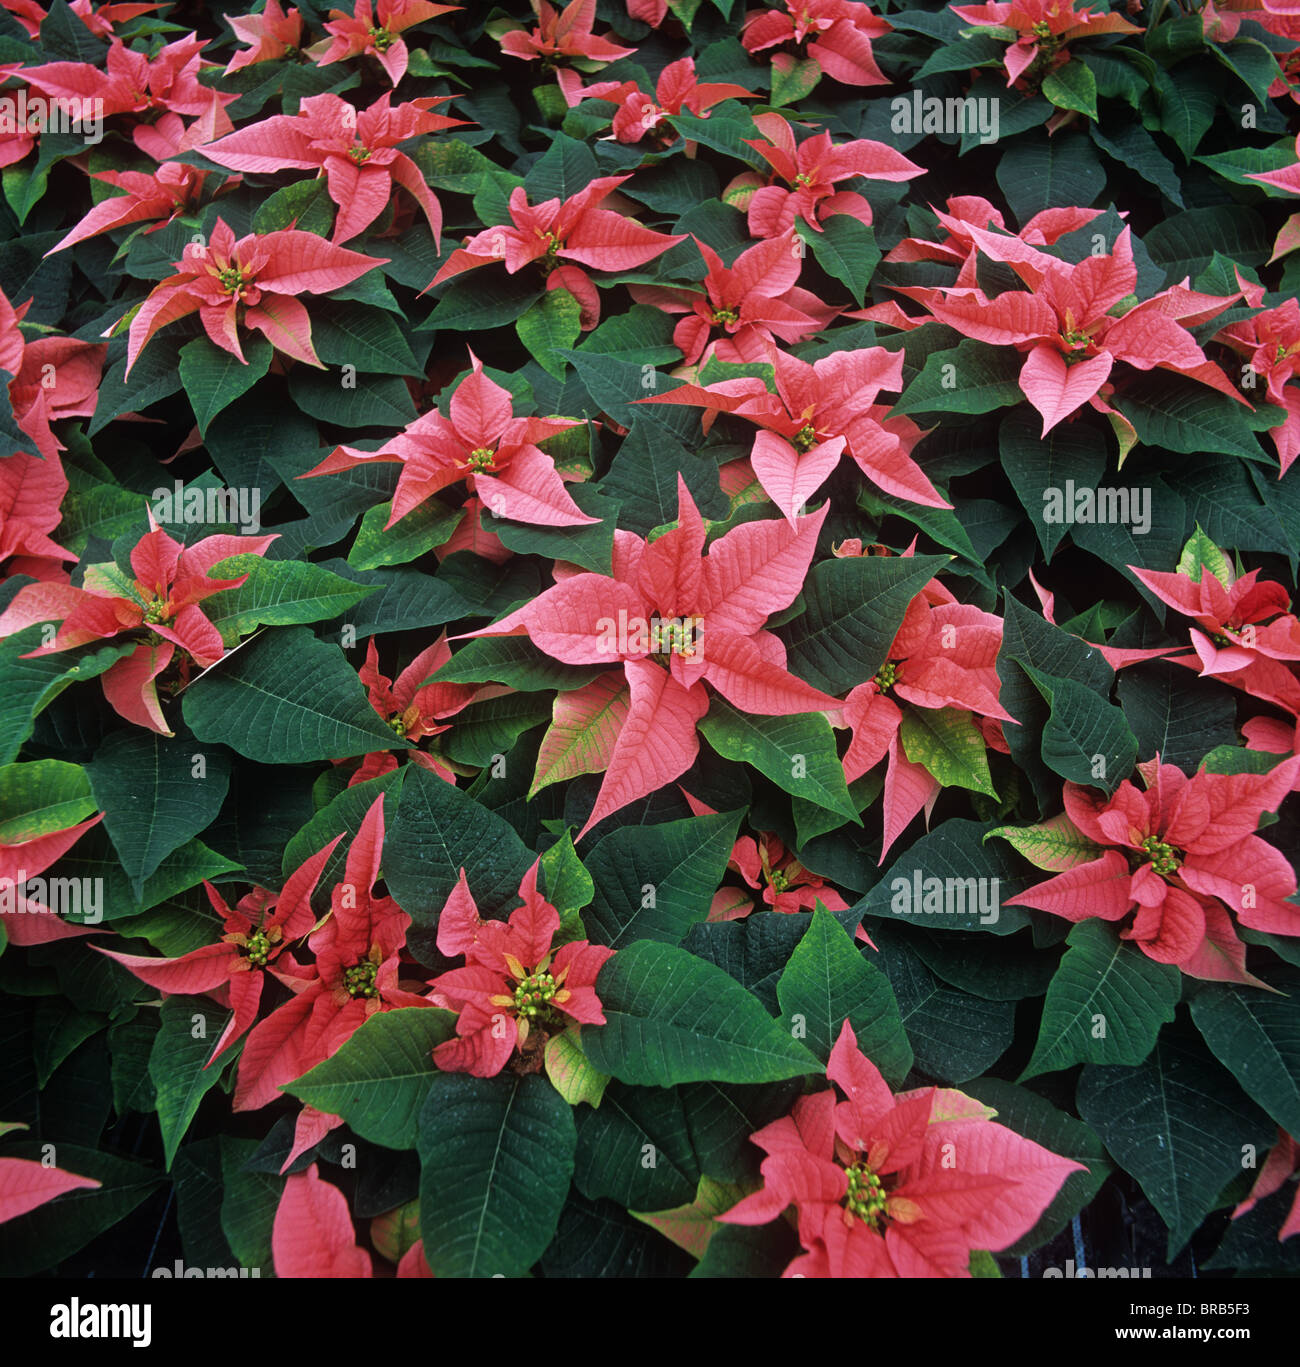 Poinsettia 'Marren' mature plant with pink bracts for Christmas market Stock Photo